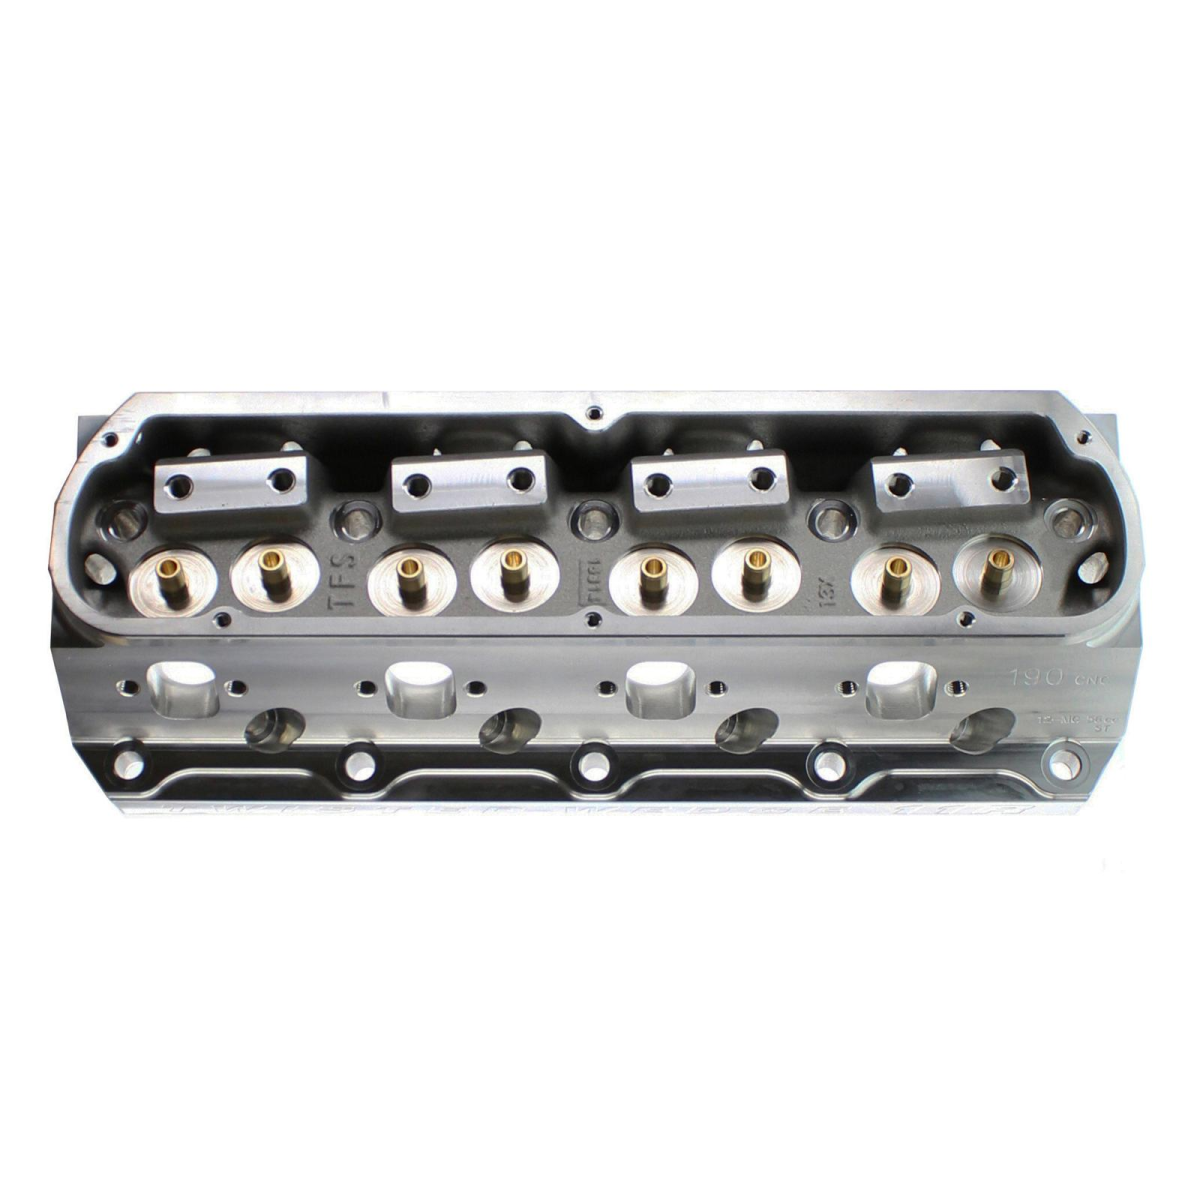 Trickflow - Trick Flow Twisted Wedge 11R Competition 190cc Bare Cylinder Head Casting, SBF, 66cc Chambers - Image 1